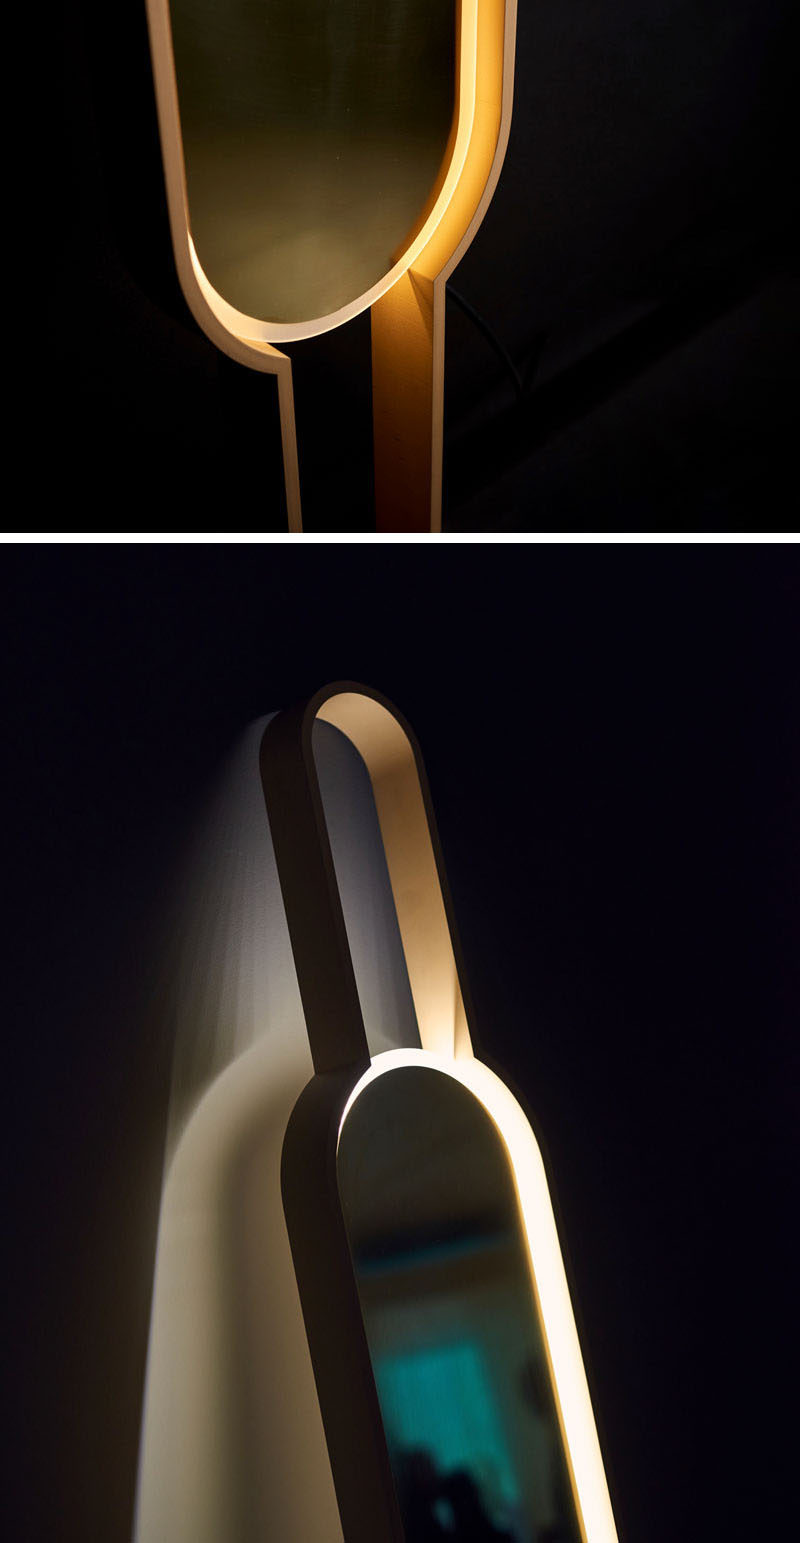 Mark Kinsley and Tamera Leigh Staten of Lake + Wells, together with Karice, have created Portal, a modern lamp that's neither a sconce nor a floor lamp, and yet it it can act as both. #Lighting #LightDesign #ModernLighting